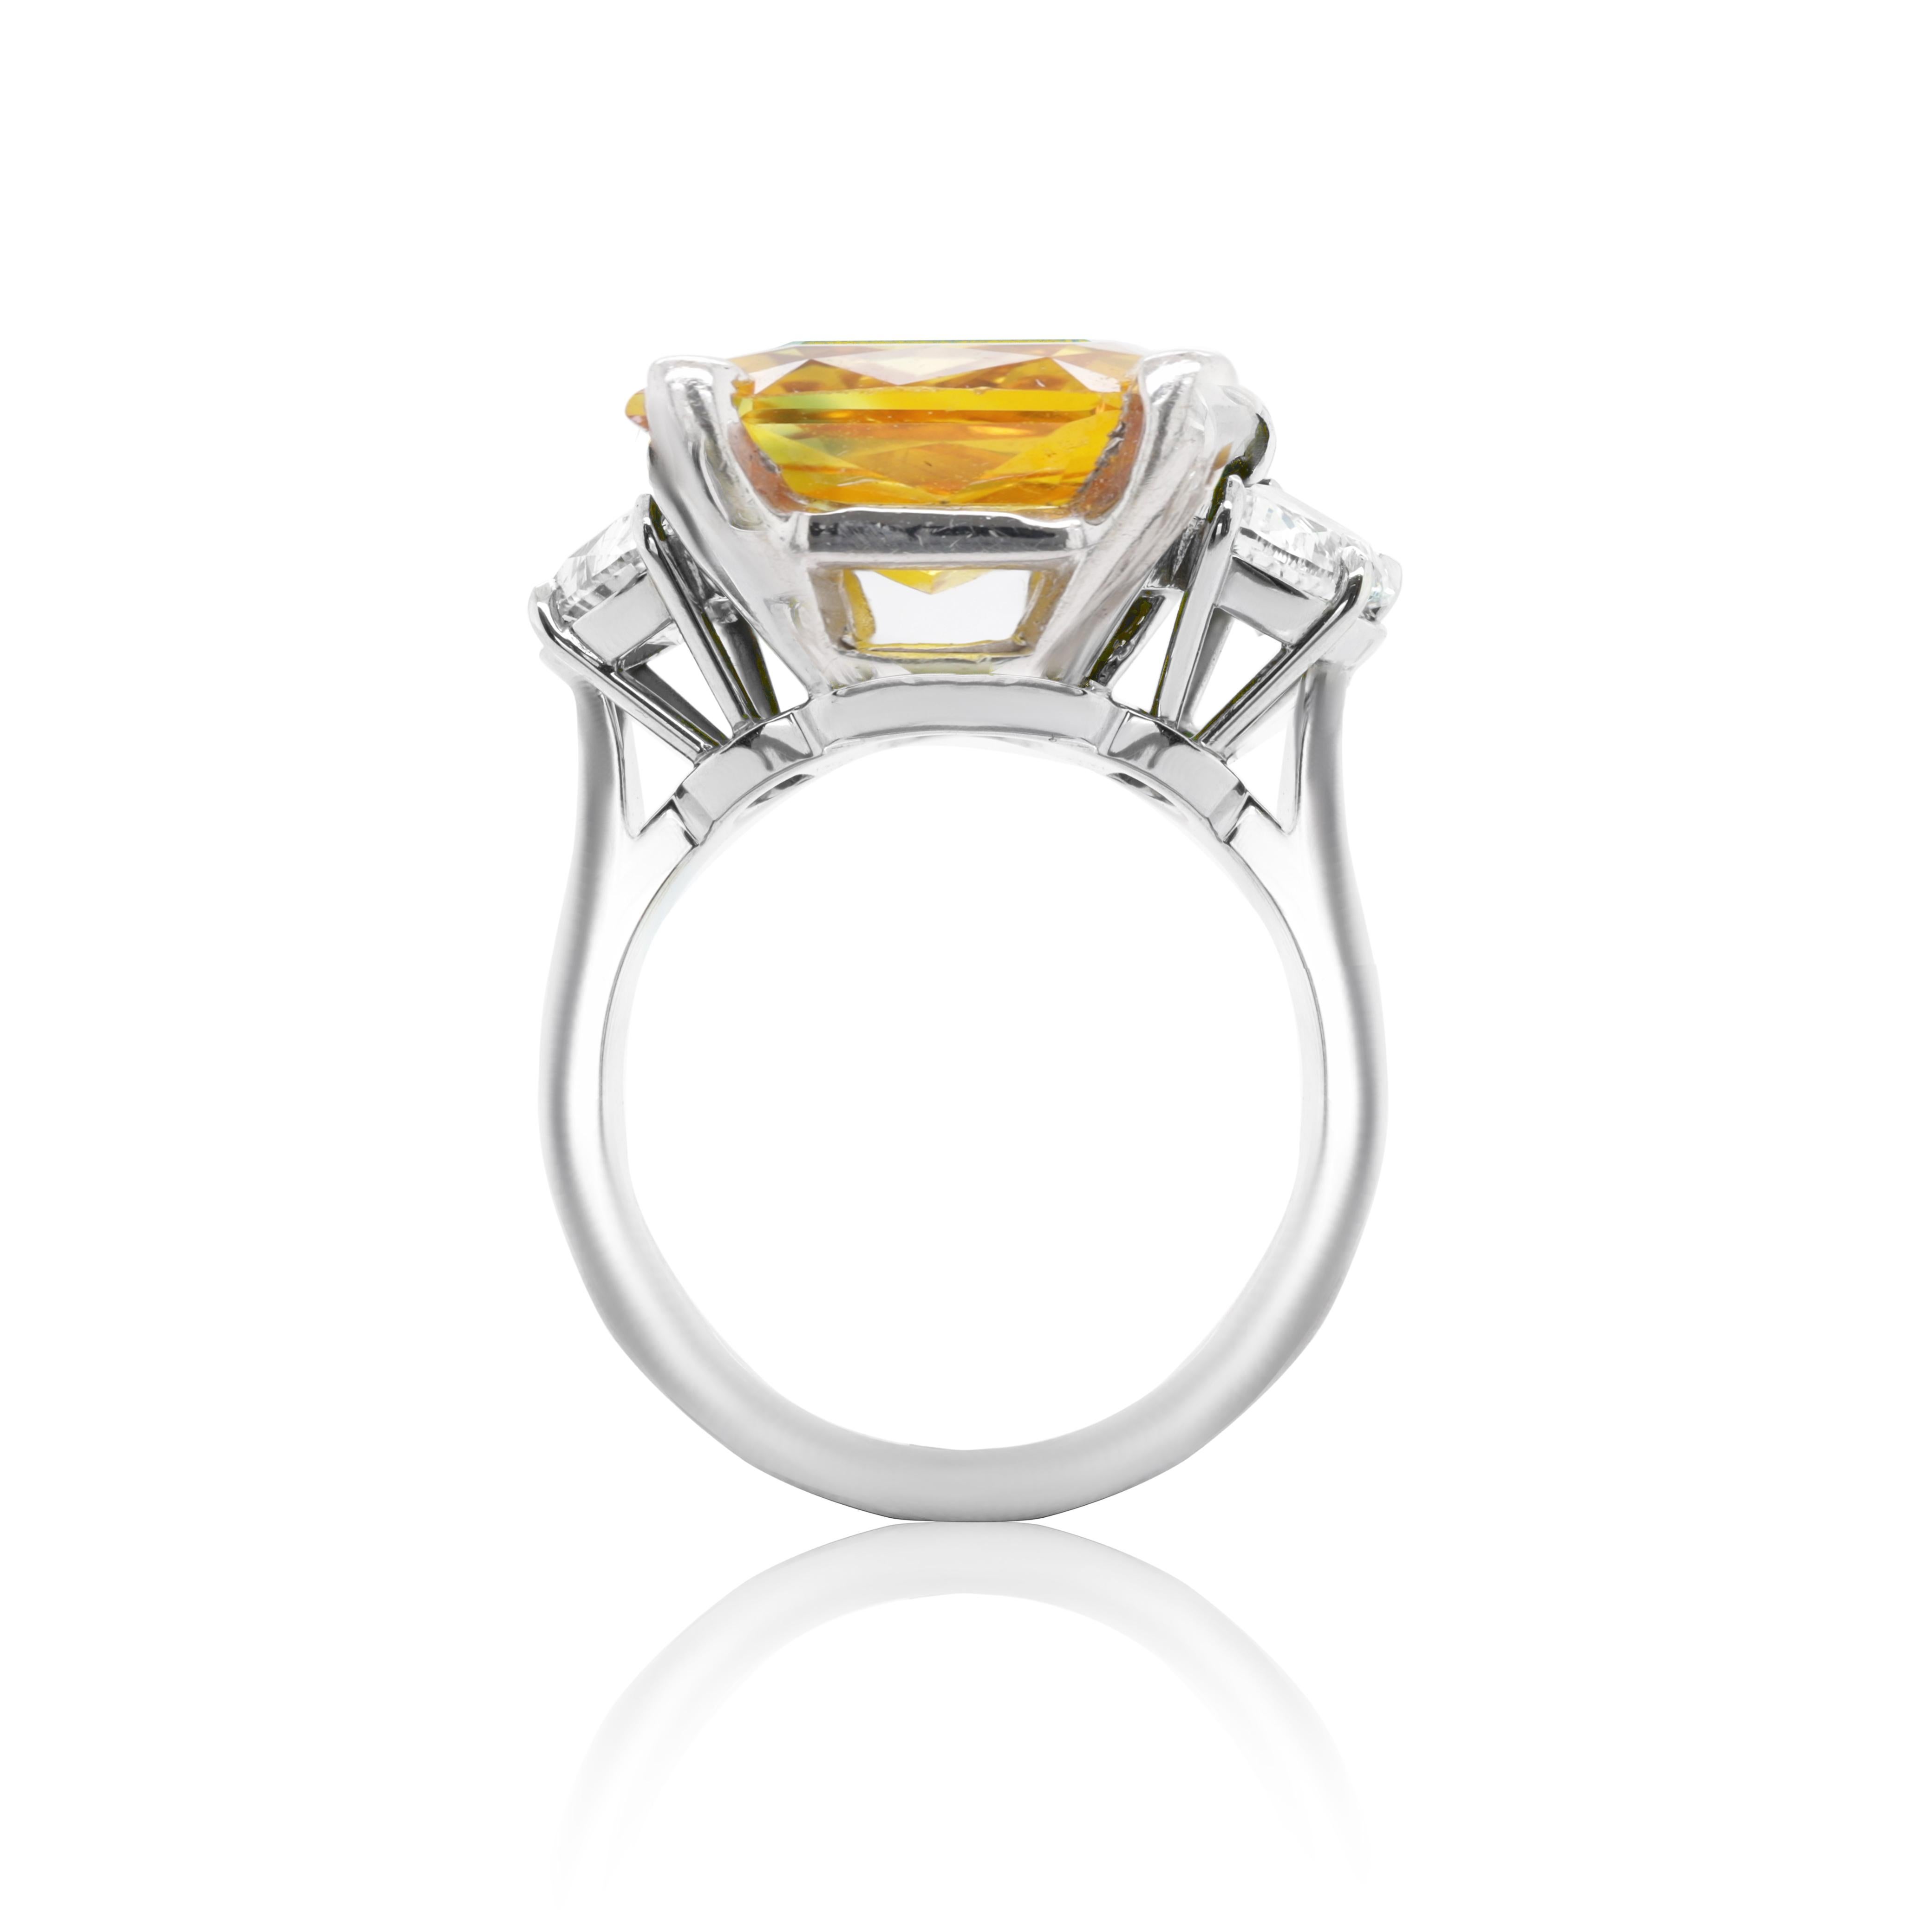 18 kt white gold sapphire and diamond ring featuring a 2.97 ct cushion cut yellow orange sapphire center with 2 baguette cut diamonds on the side totaling 0.85 cts of diamonds (C.Dunaigre Certified).
Diana M. is a leading supplier of top-quality